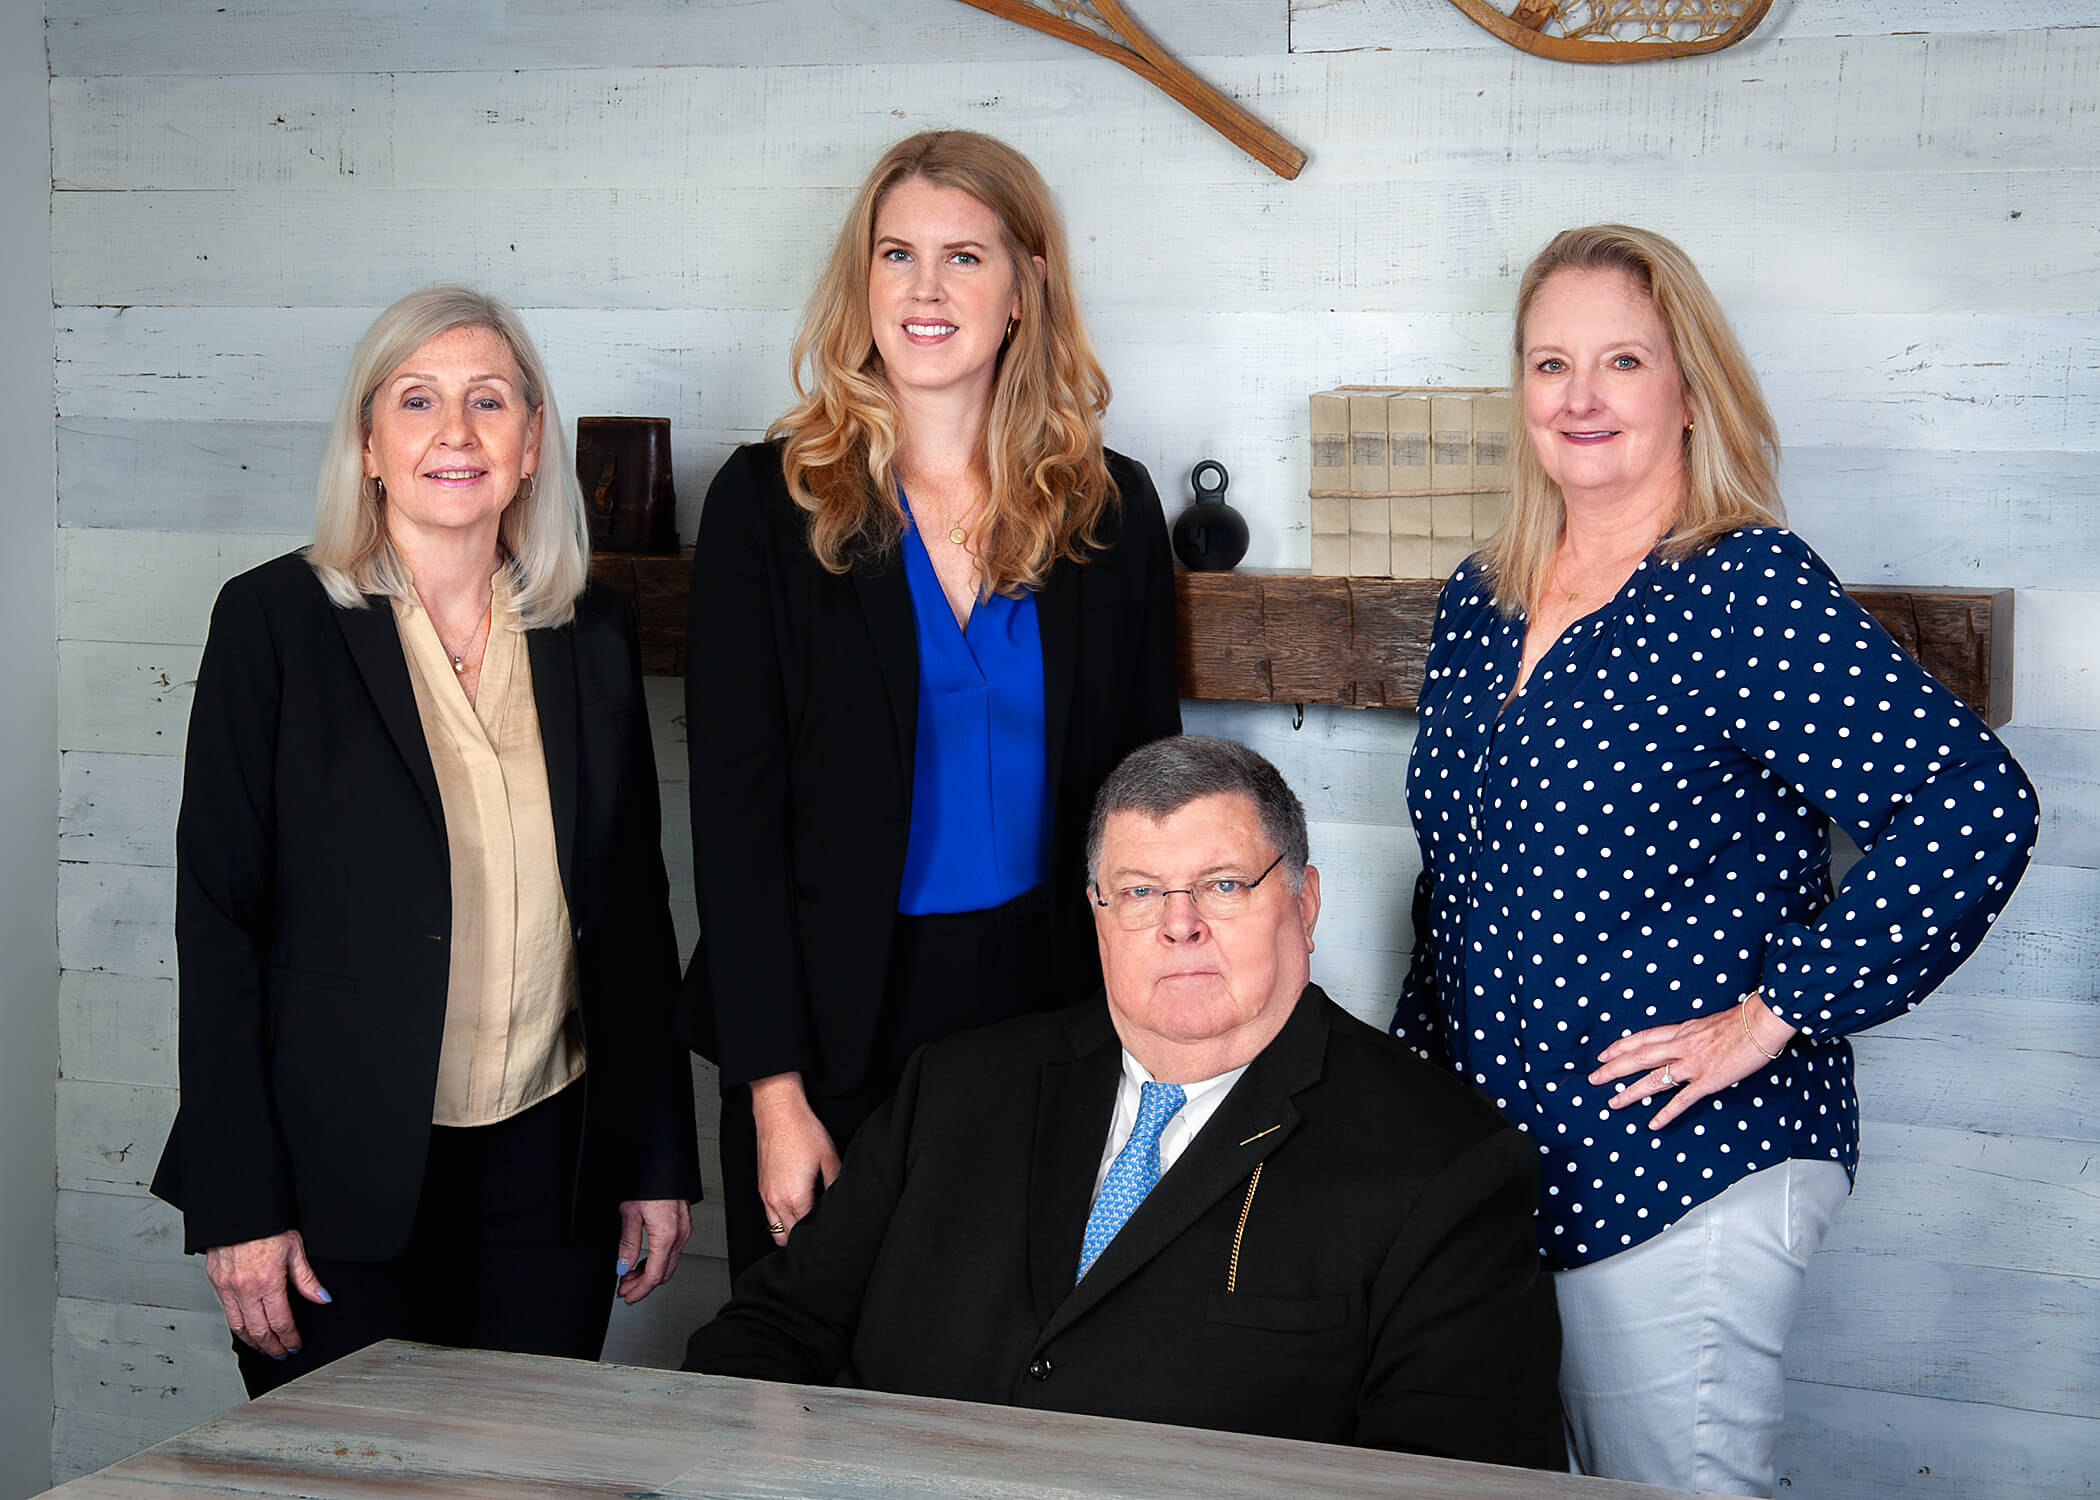 A photo of the 680 group team: Cosmo sits in the front with the staff behind him. From left to right: Shelia Whitten, Emily Boyd, Jana  Burke